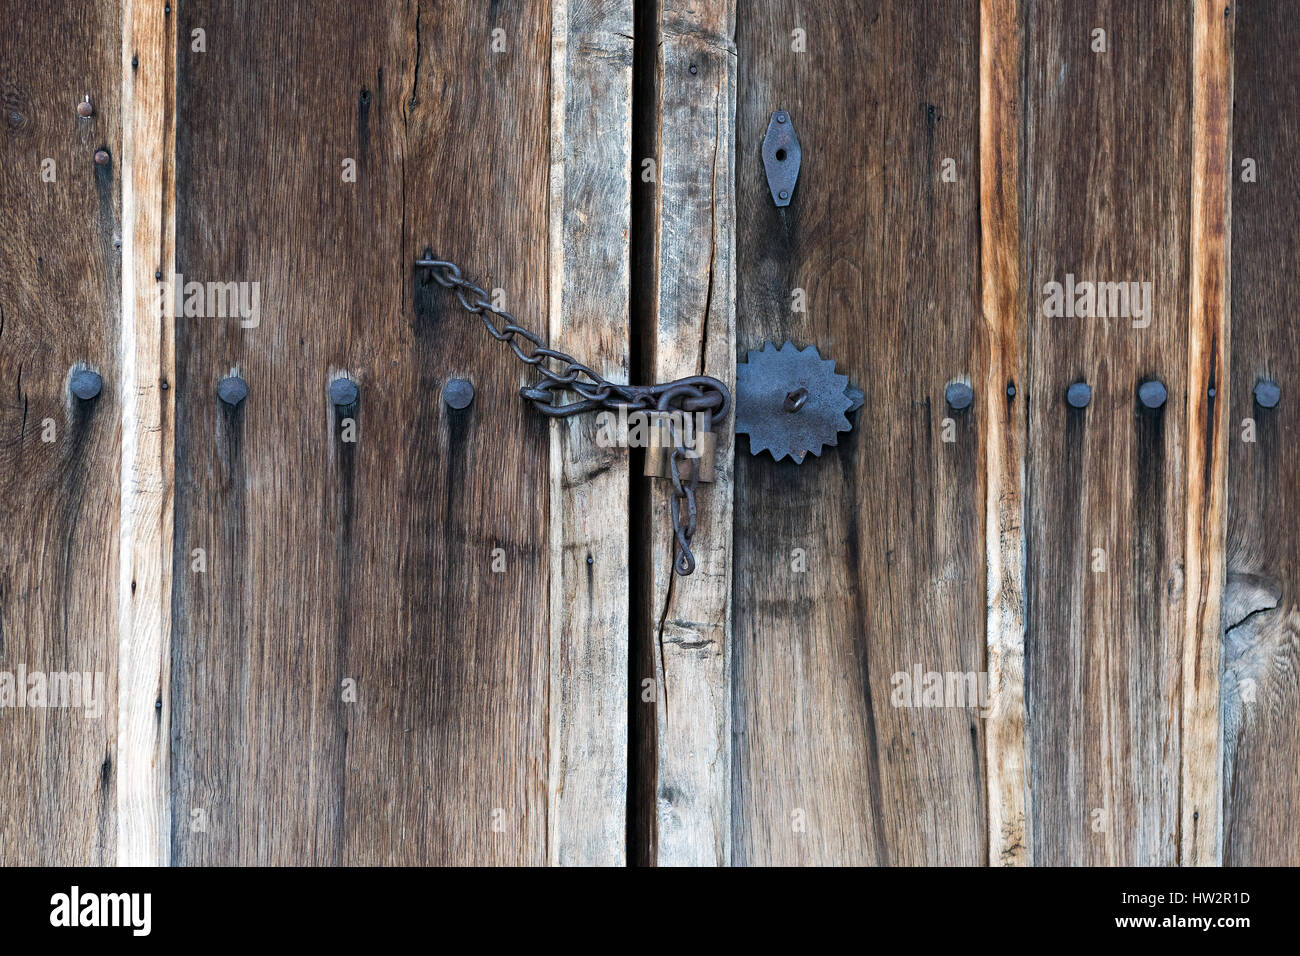 Chain locked wooden door with big iron nails and metal ornaments Stock Photo